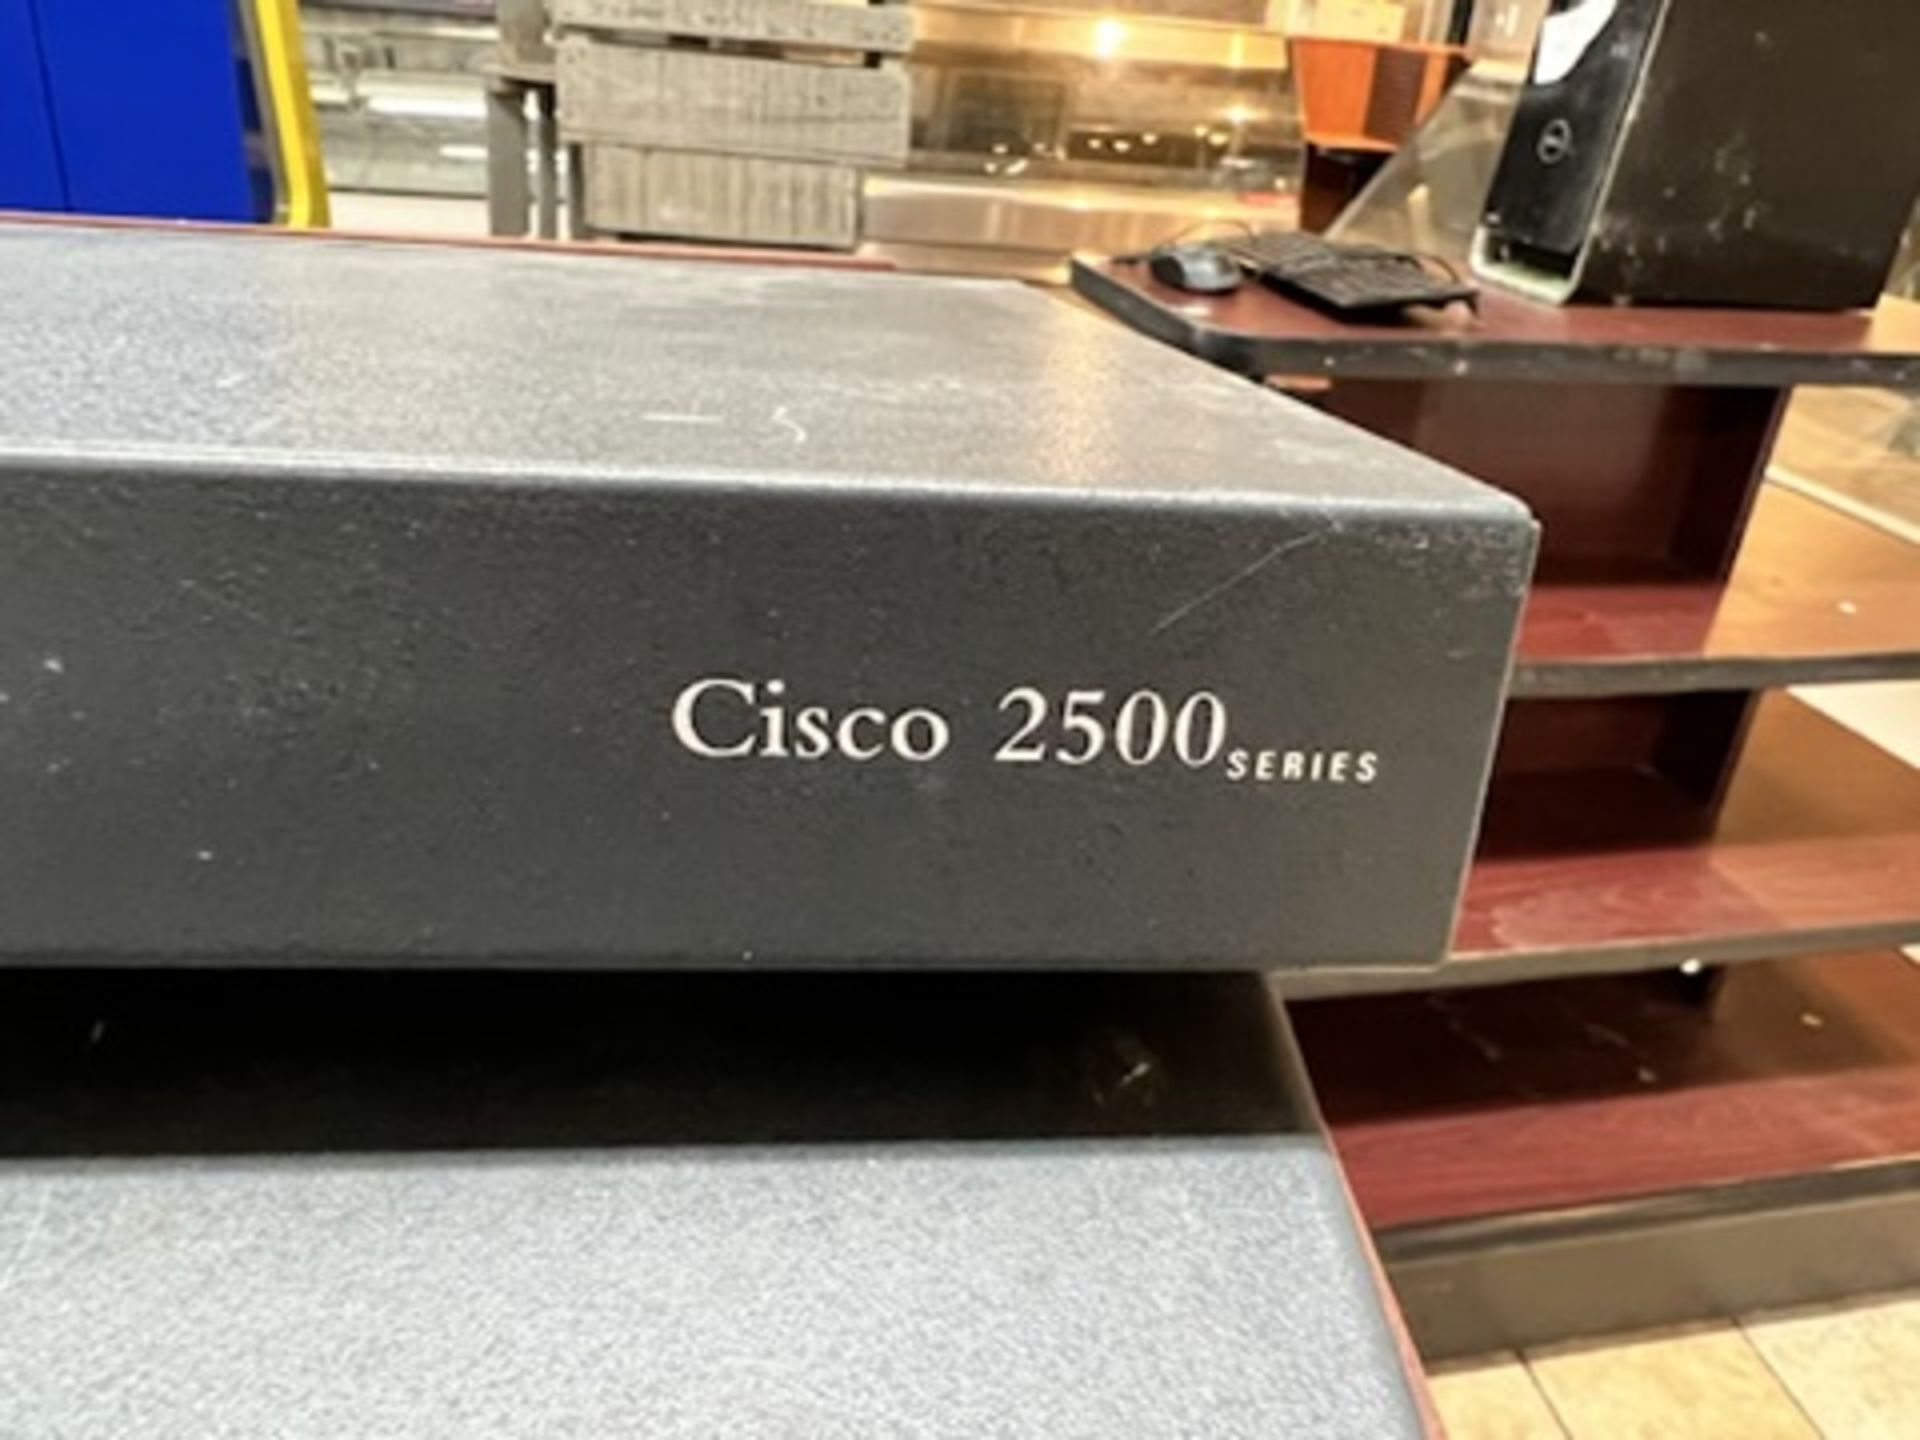 Lot of: (2) Cisco 2500 series routers , (1) Cisco IAD 2400 Series router, (2) Linksys 24-port intern - Image 3 of 18